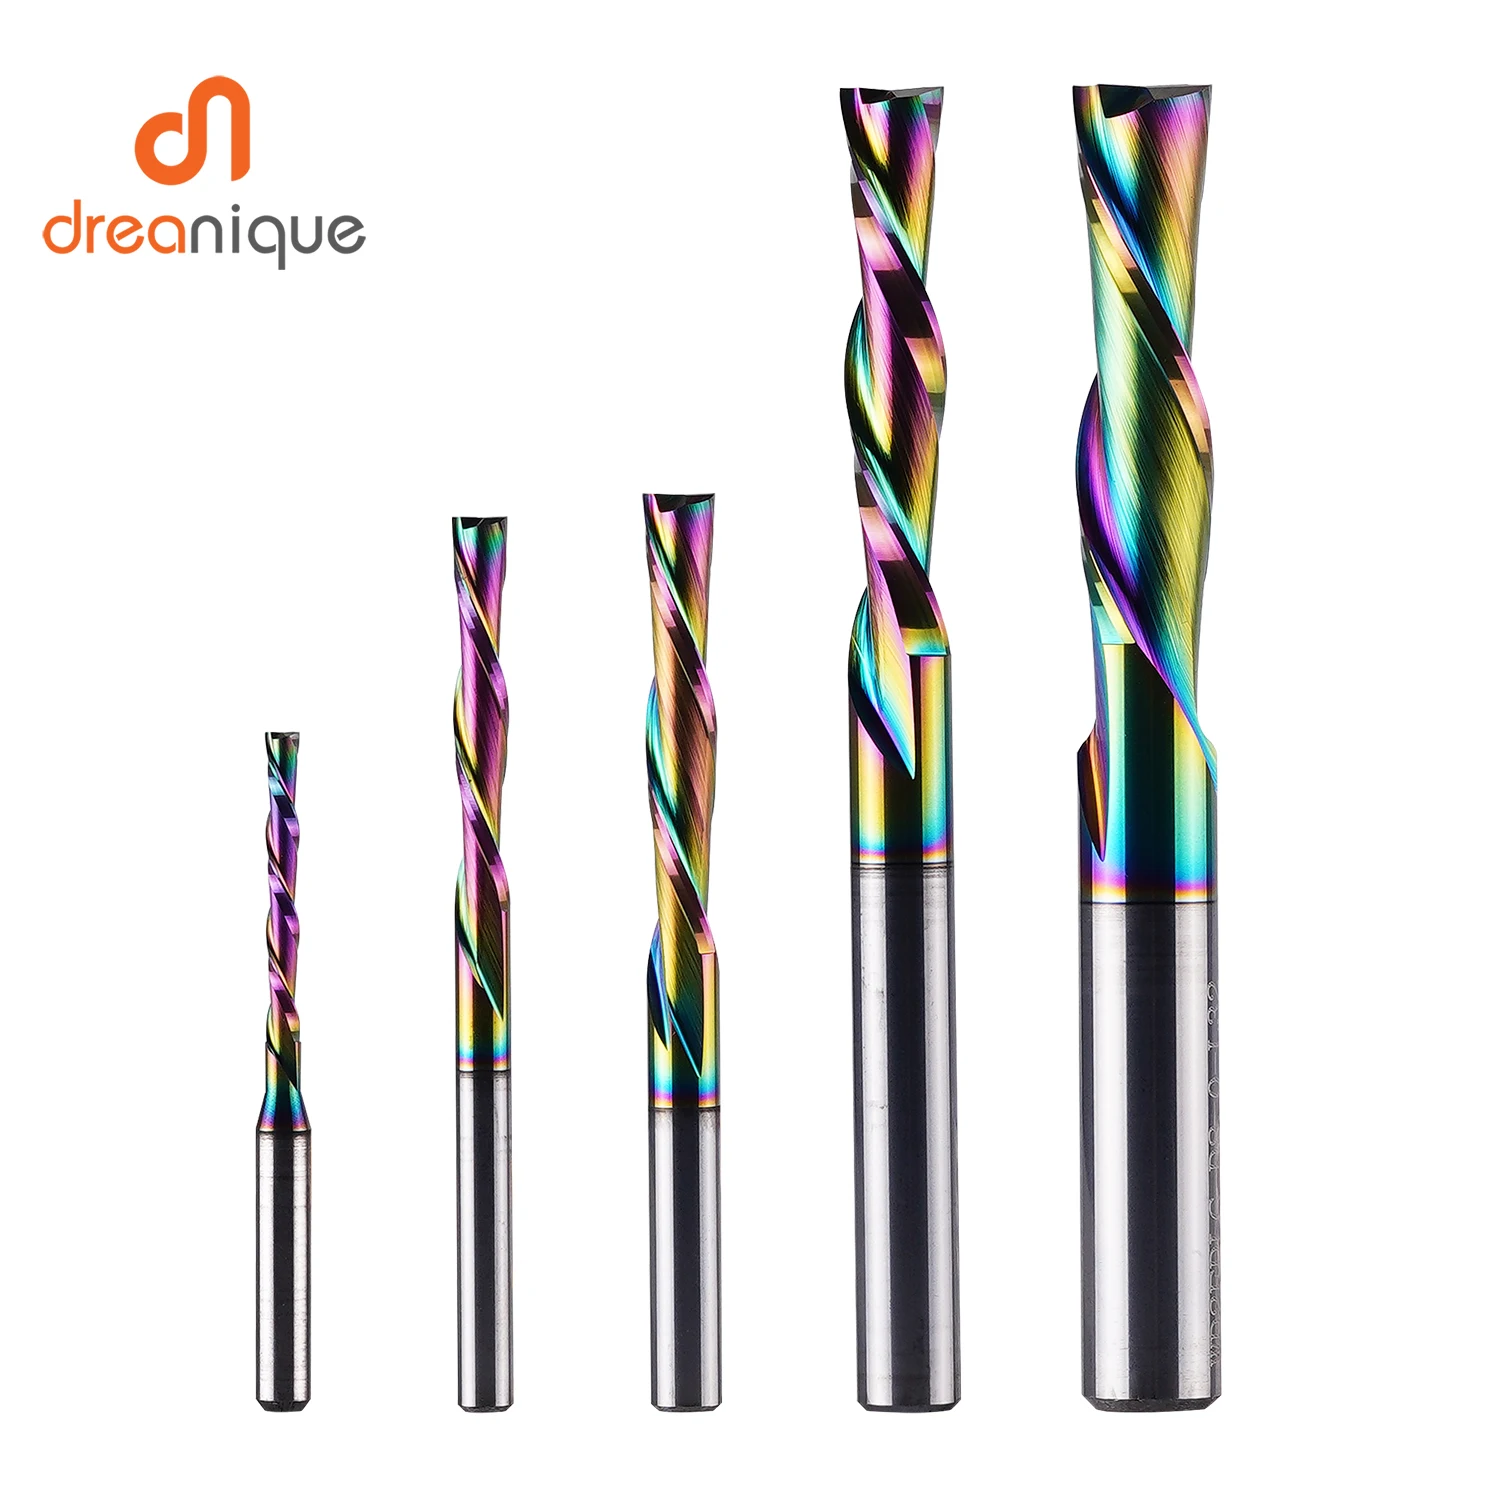 Dreanique 1pc DLC Coating Solid Carbide Milling Cutter 3.1 4 6 8 6.35mm 2 Flute Spiral Router Bit End Mill Wood MDF Down Cut